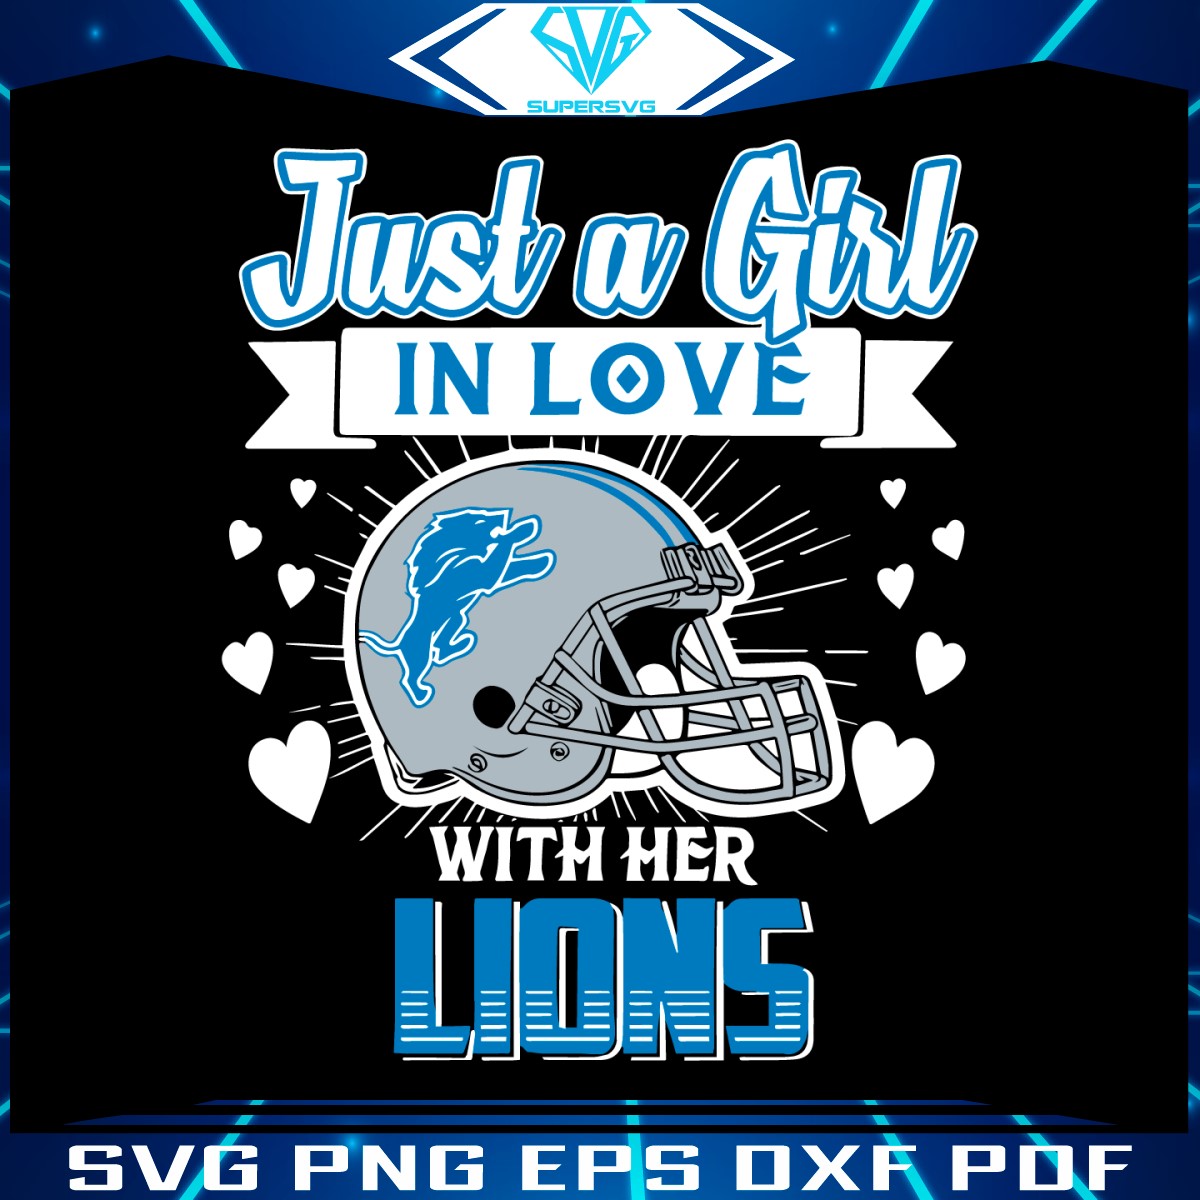 just-a-girl-in-love-with-her-lions-svg